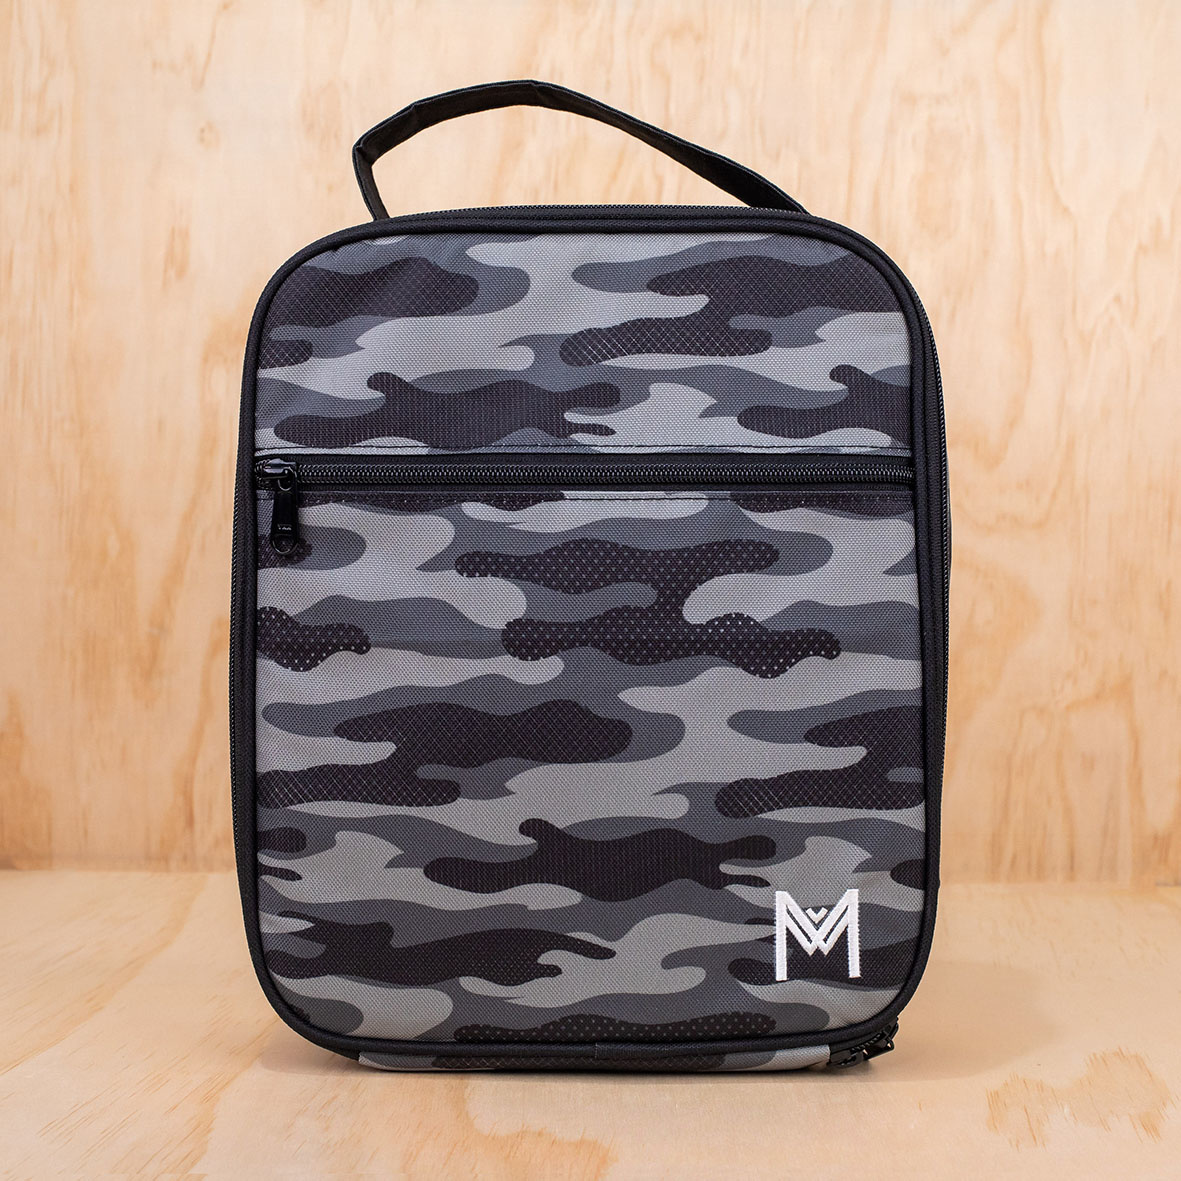 Montii insulated Lunch Bag Large - Combat-1